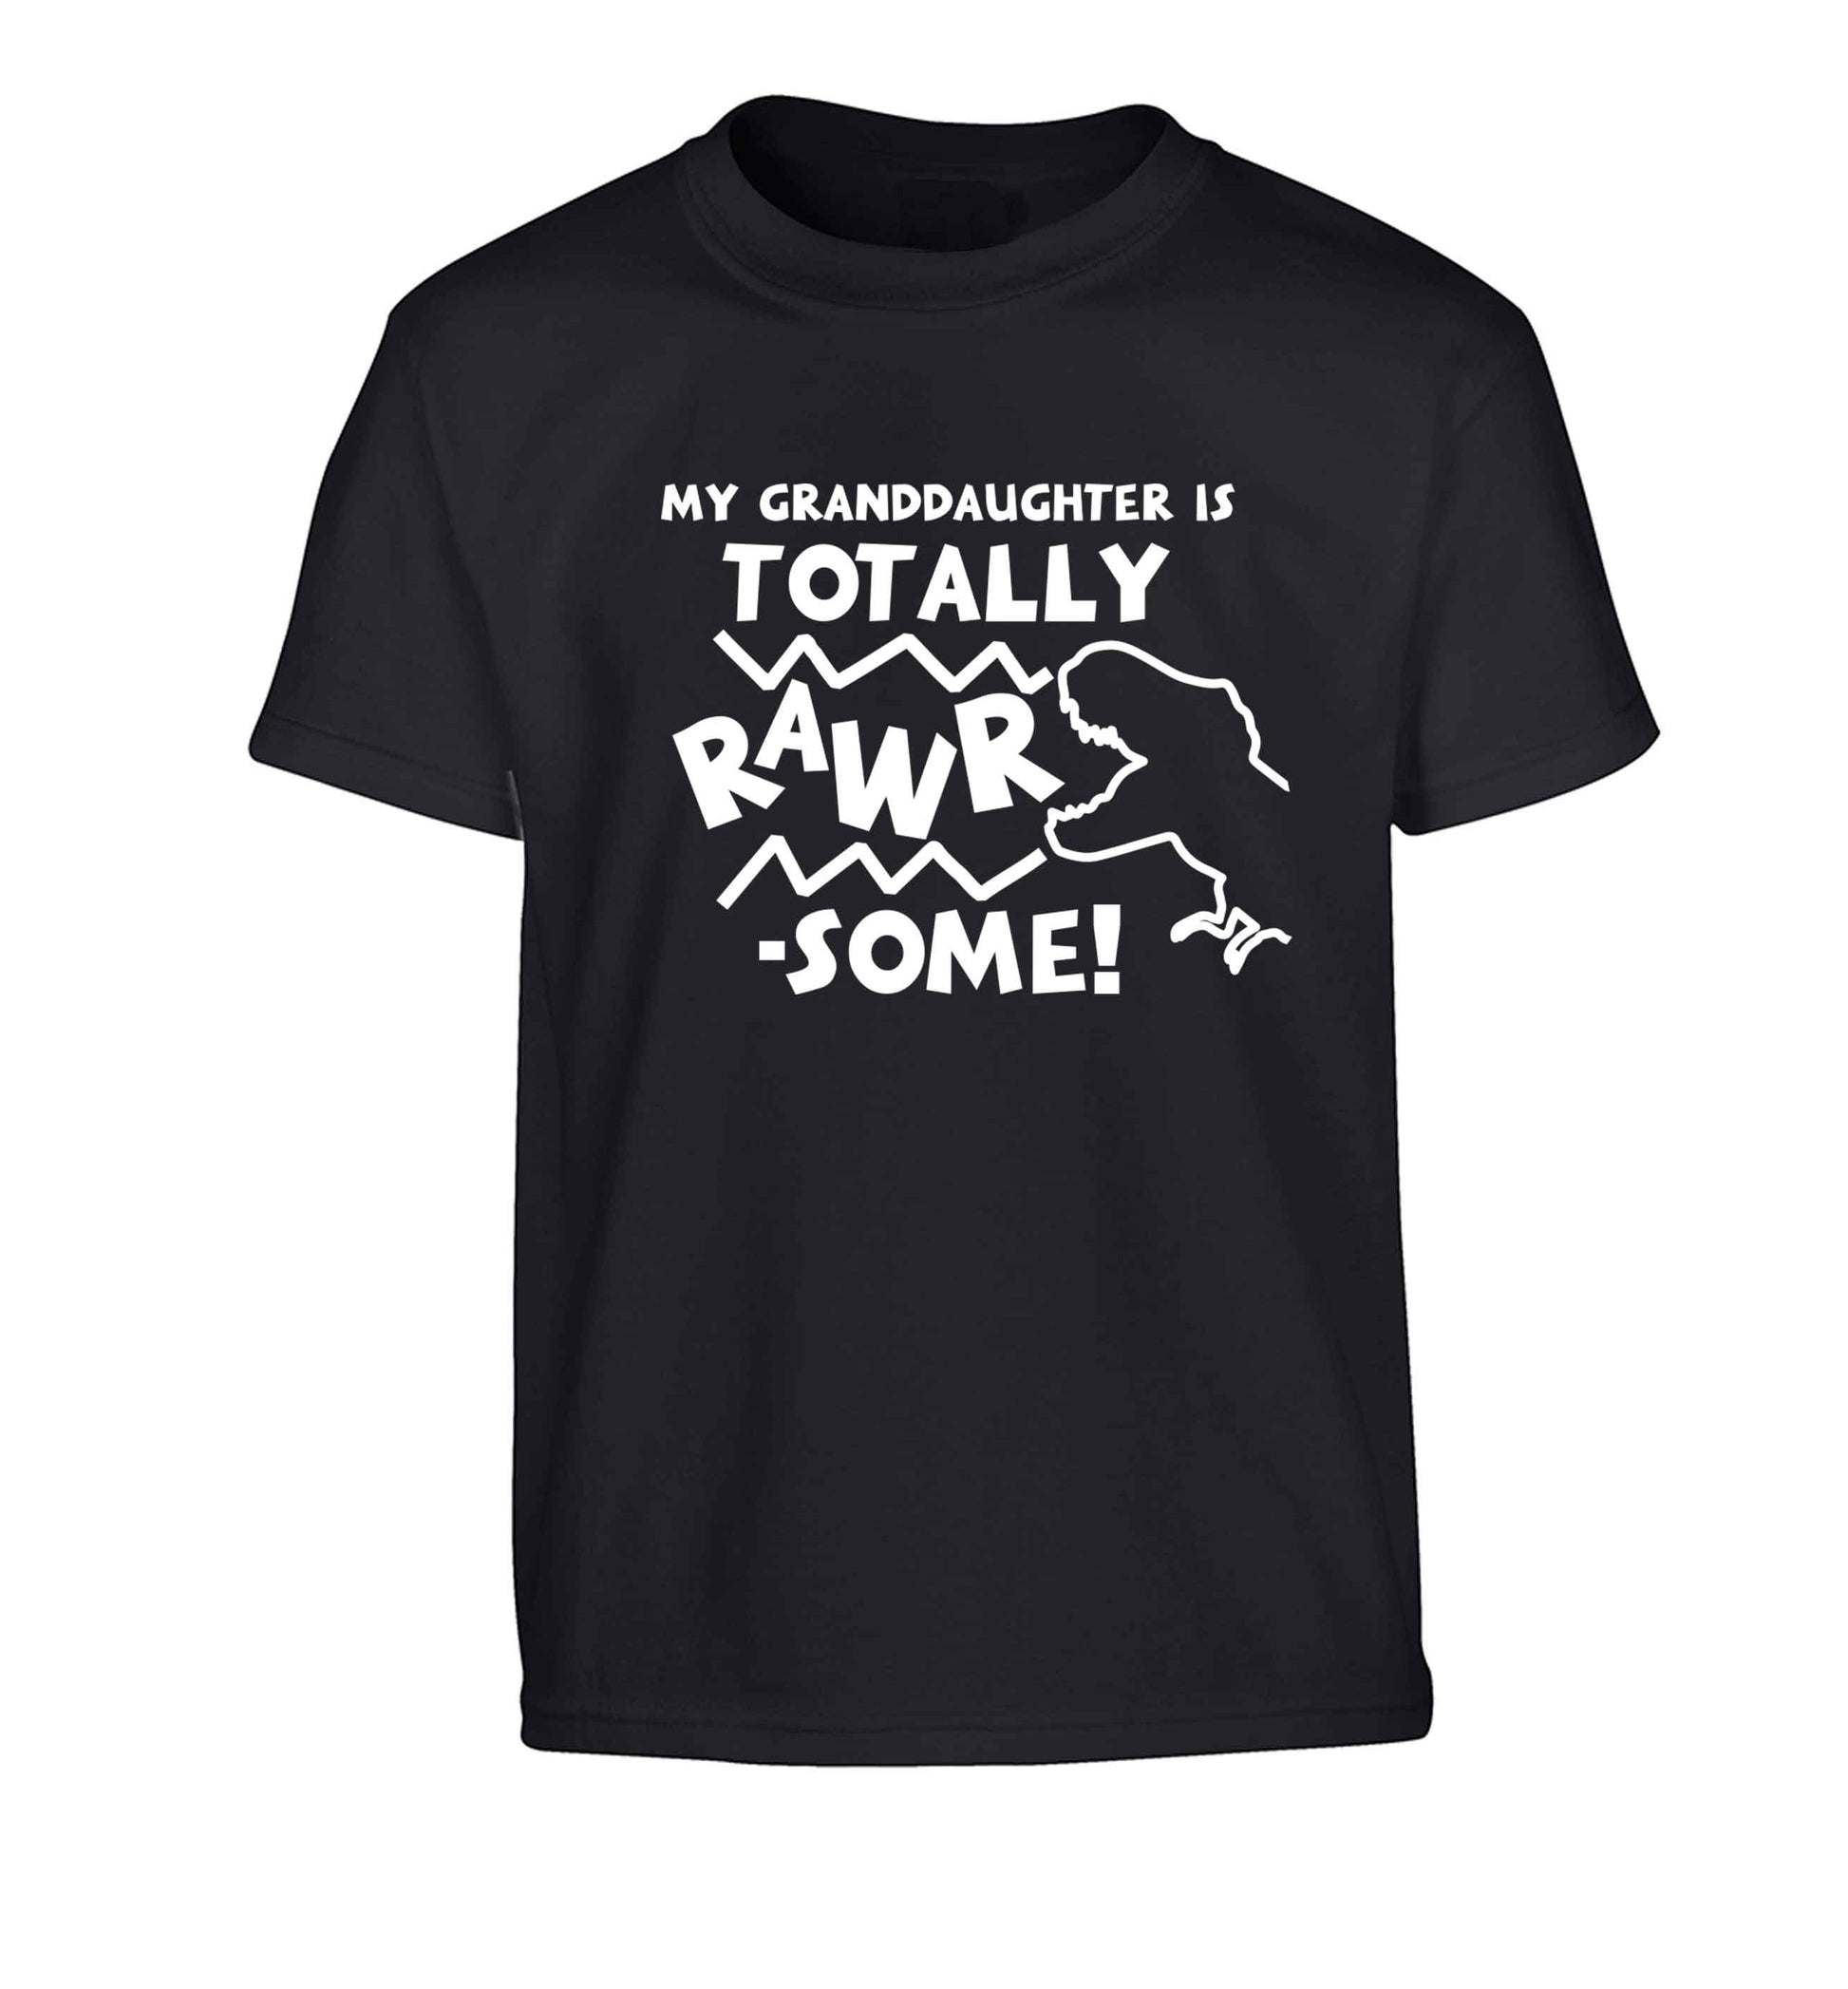 My granddaughter is totally rawrsome Children's black Tshirt 12-13 Years